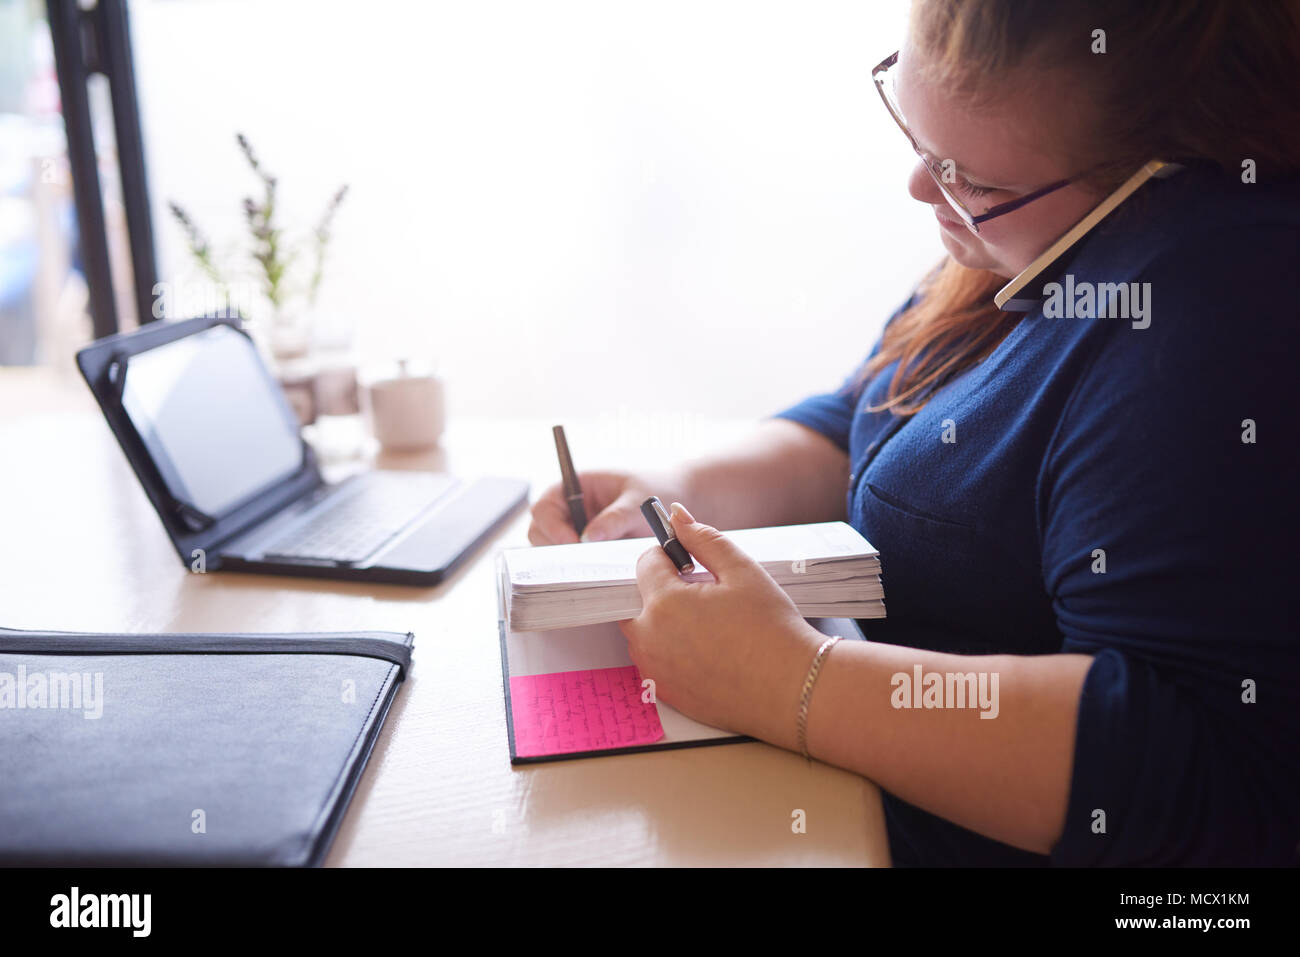 Moderately overweight caucasian woman seated at her desk busy multitasking while she writes in her notebook and talks on her phone, that is pinched between her head and shoulders. Stock Photo